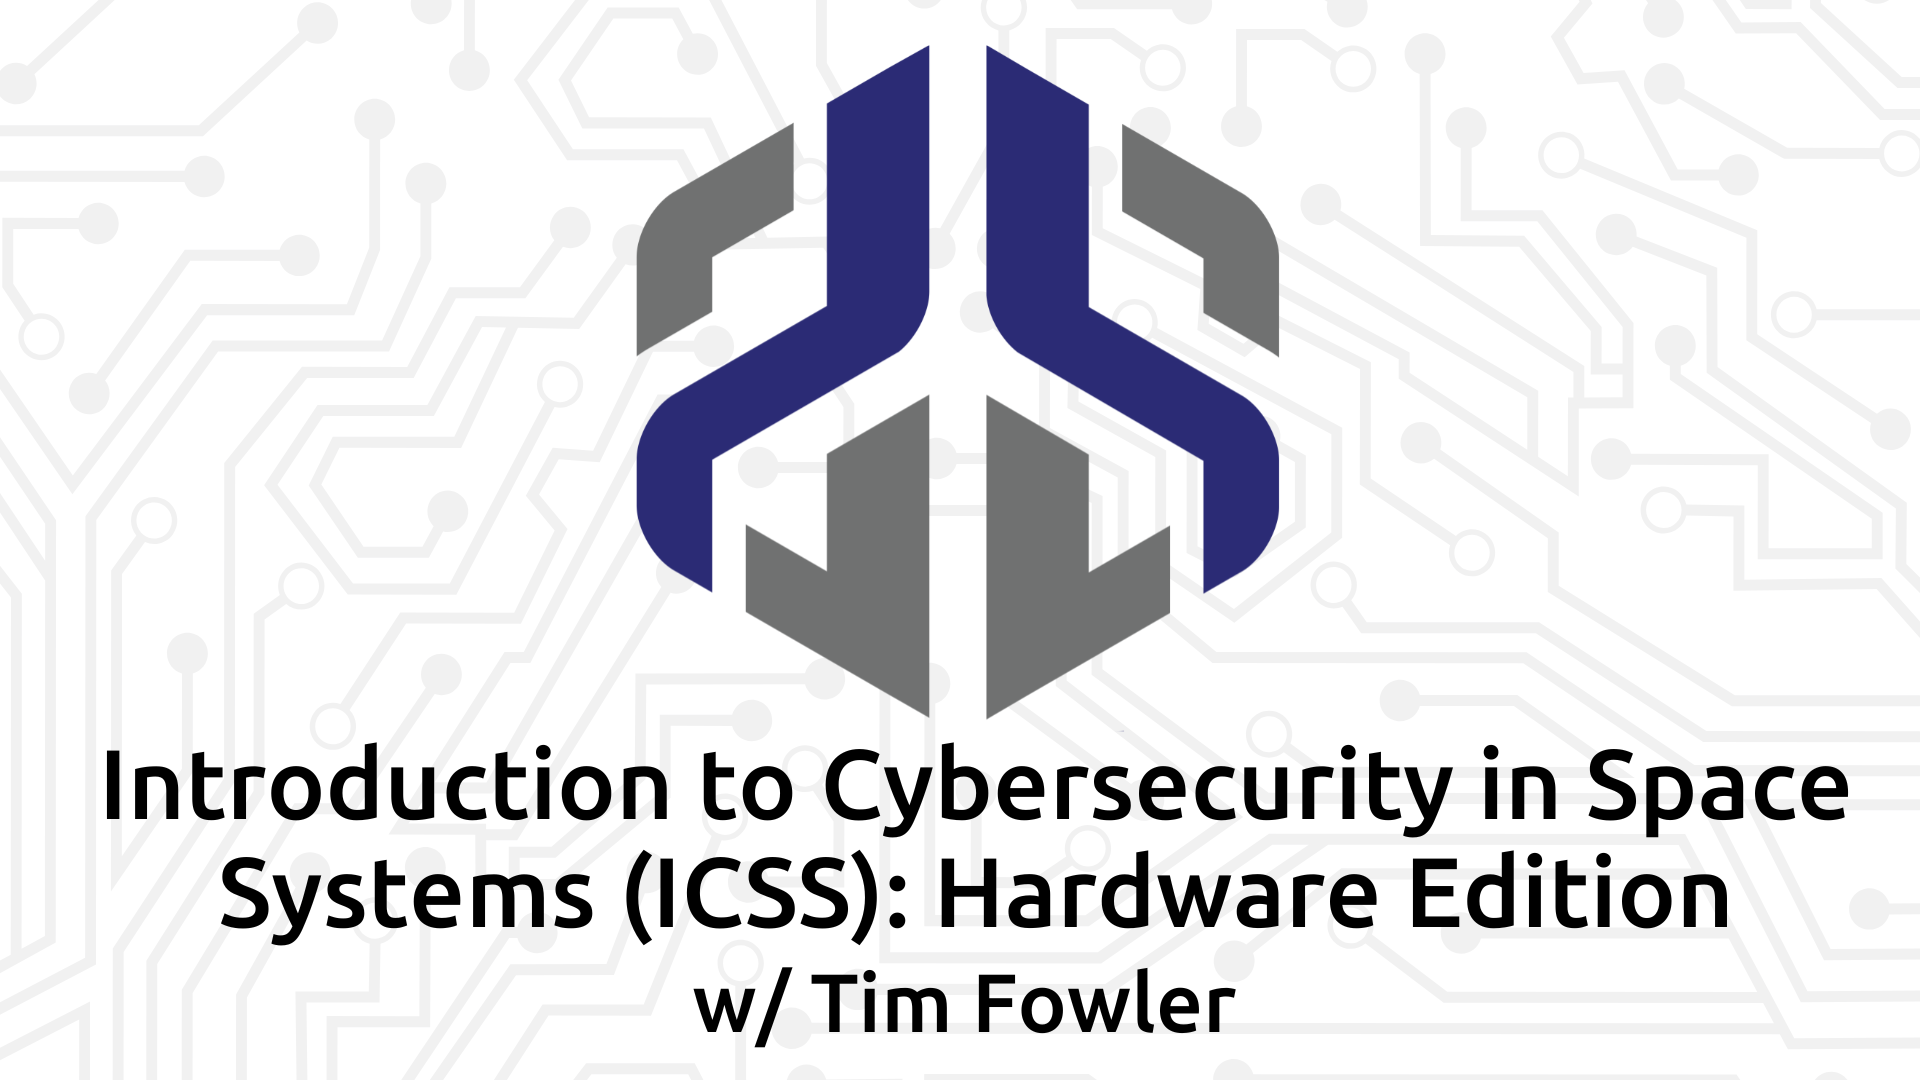 Introduction to Cybersecurity in Space Systems (ICSS): Hardware Edition w/ Tim Fowler